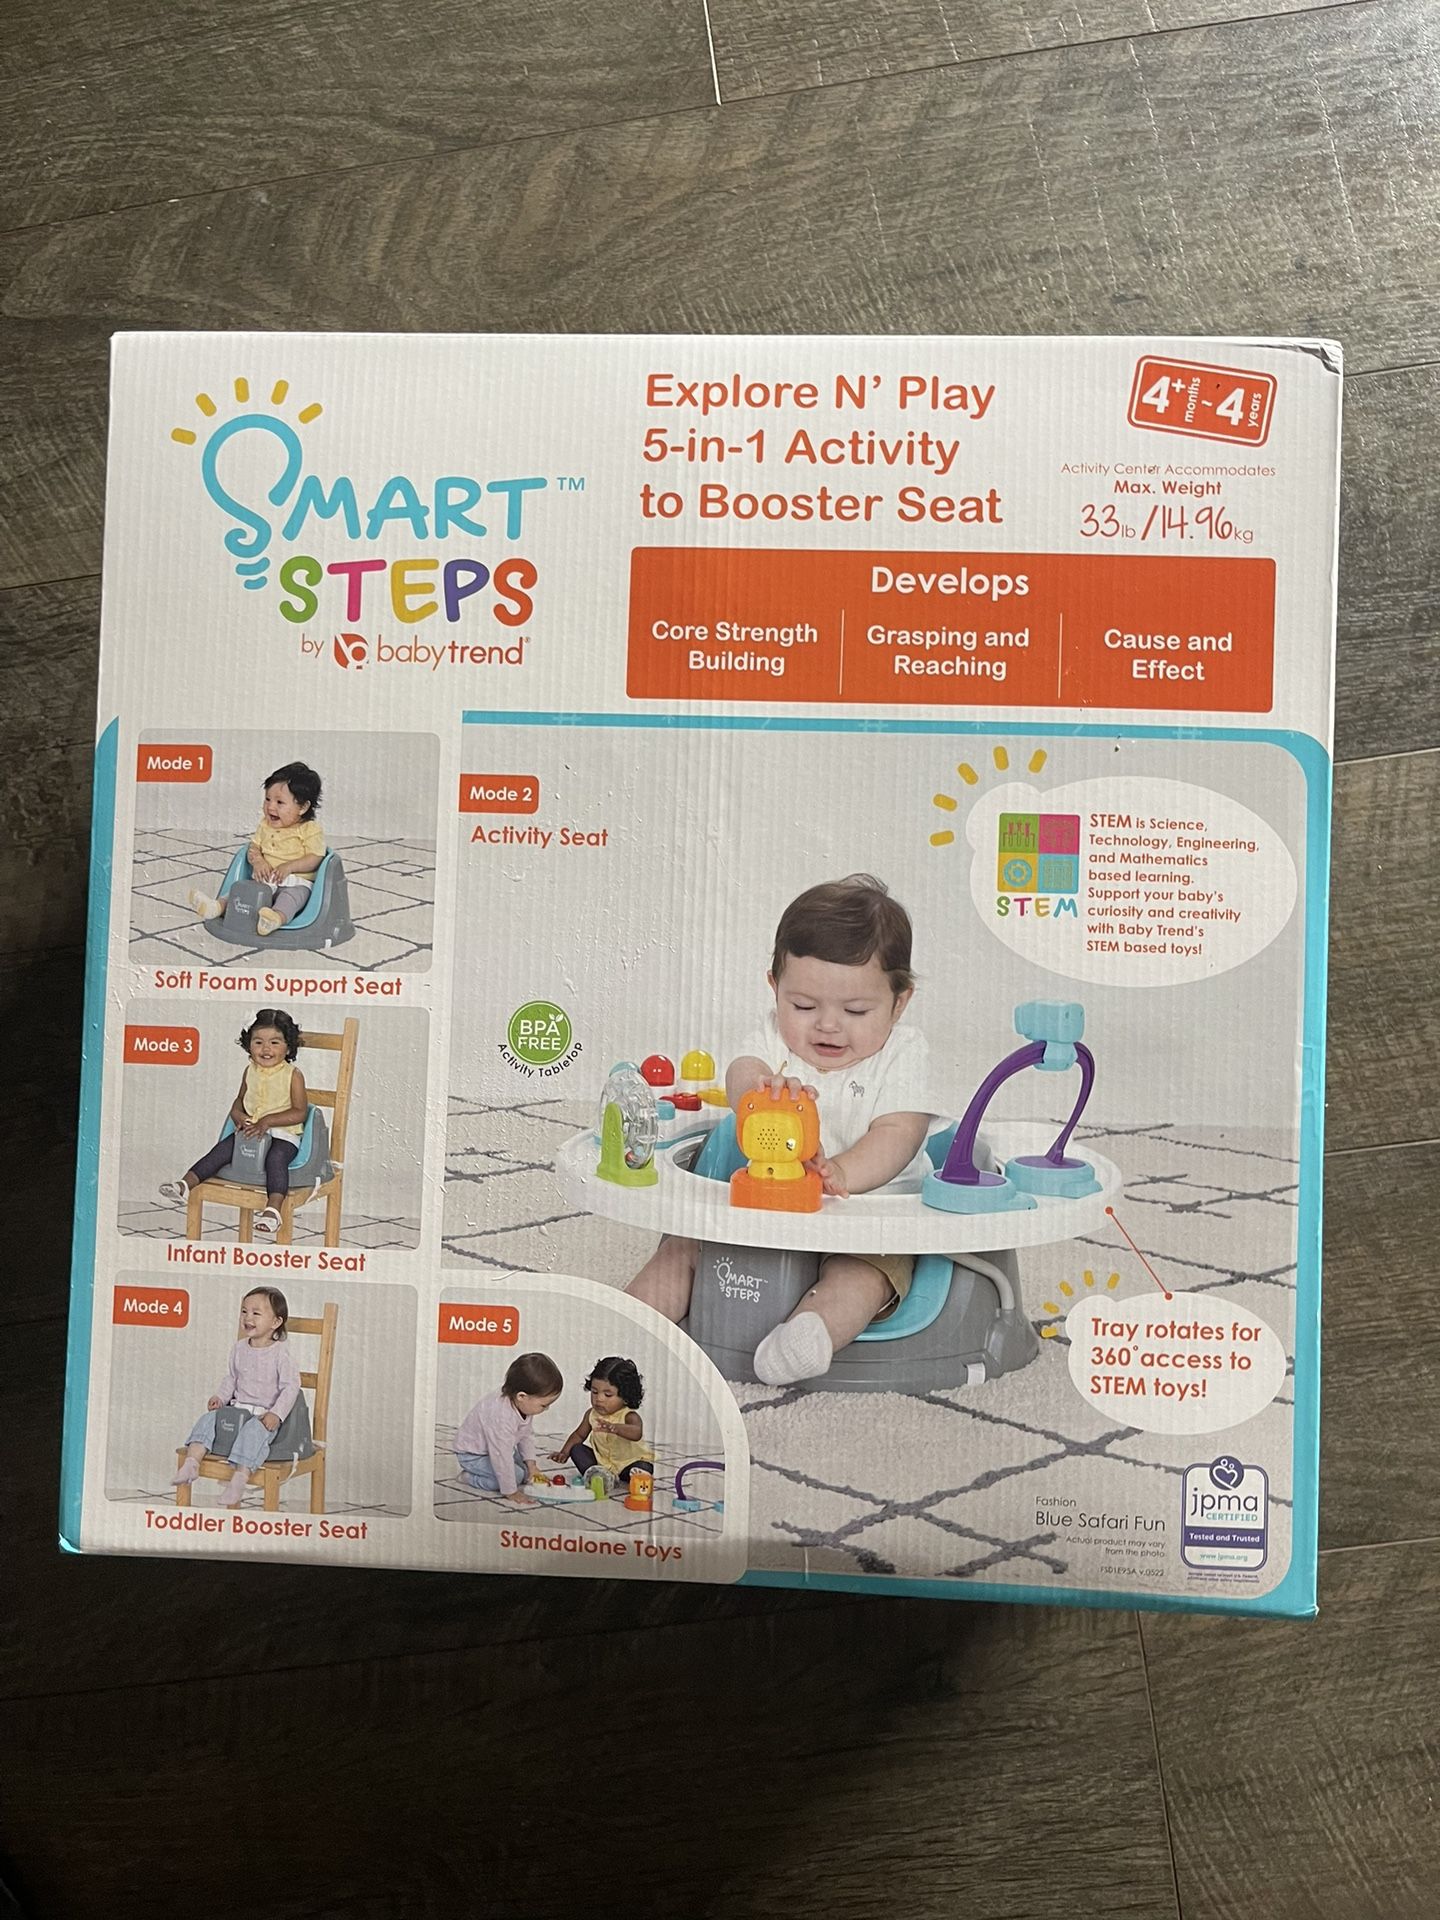 Smart Steps Explore N’ Play 5-in-1 Activity to Booster Seat - Blue Safari Fun 